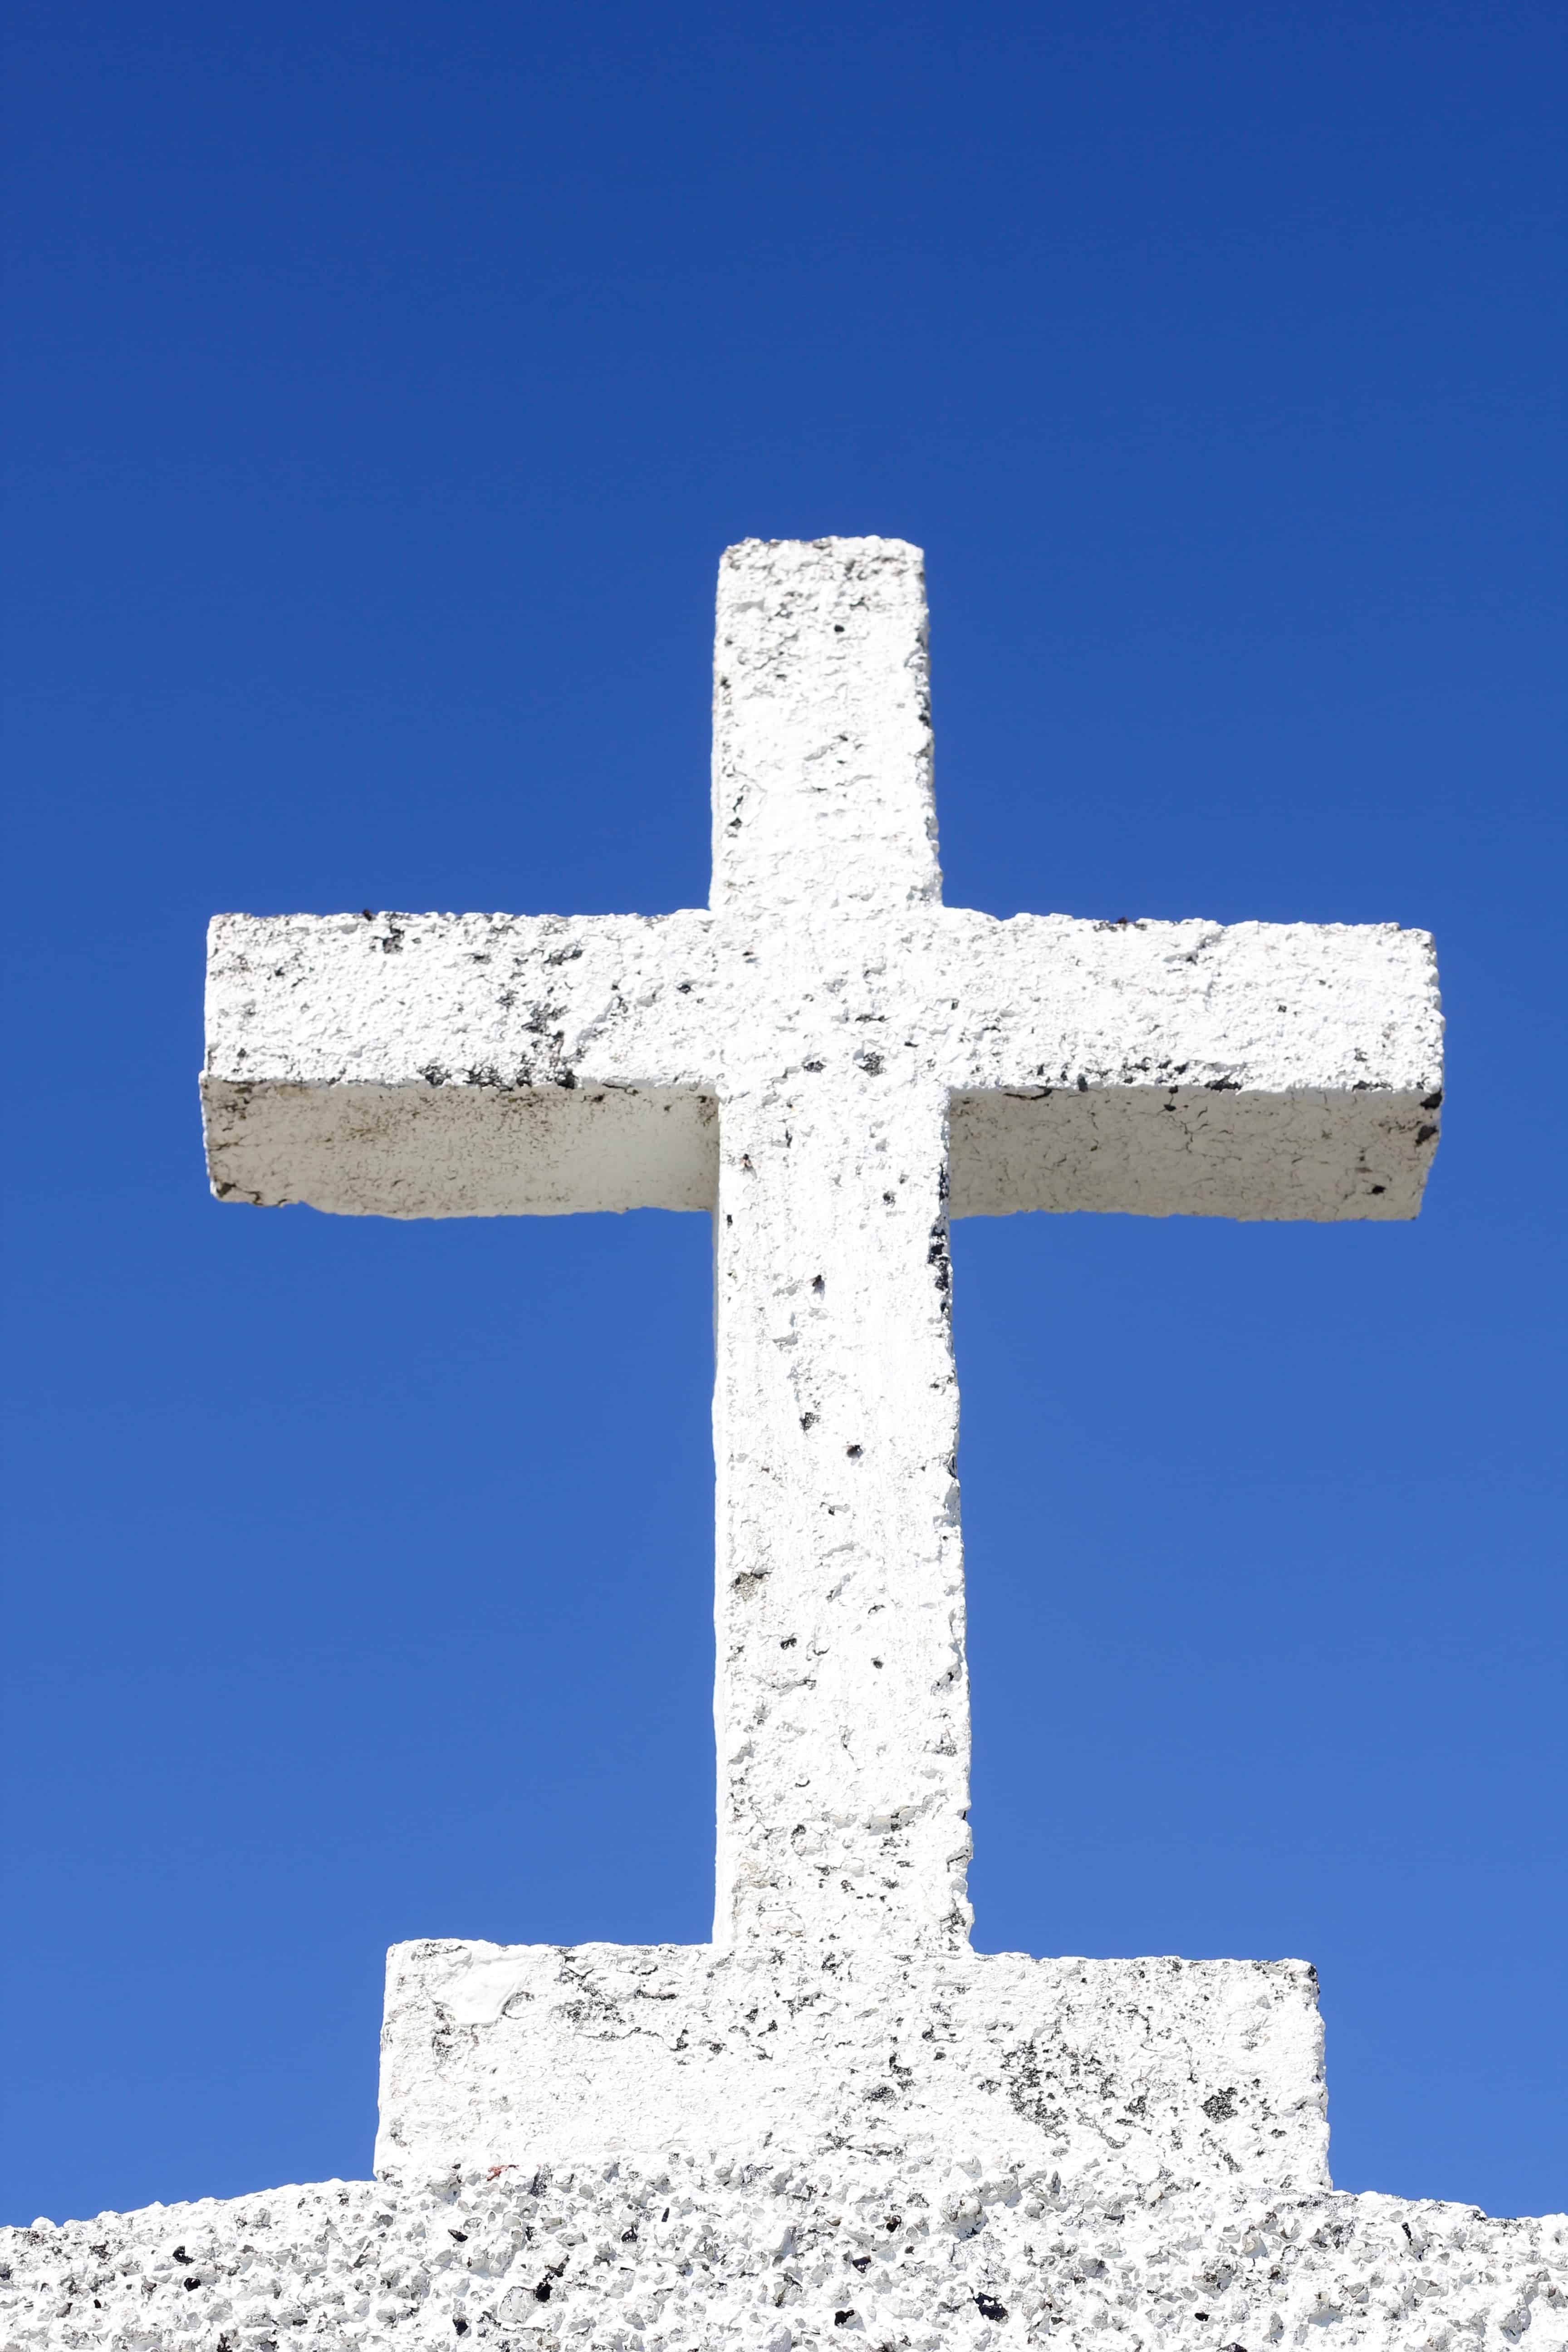 The Sign of the Cross is Powerful - Catholic Stand